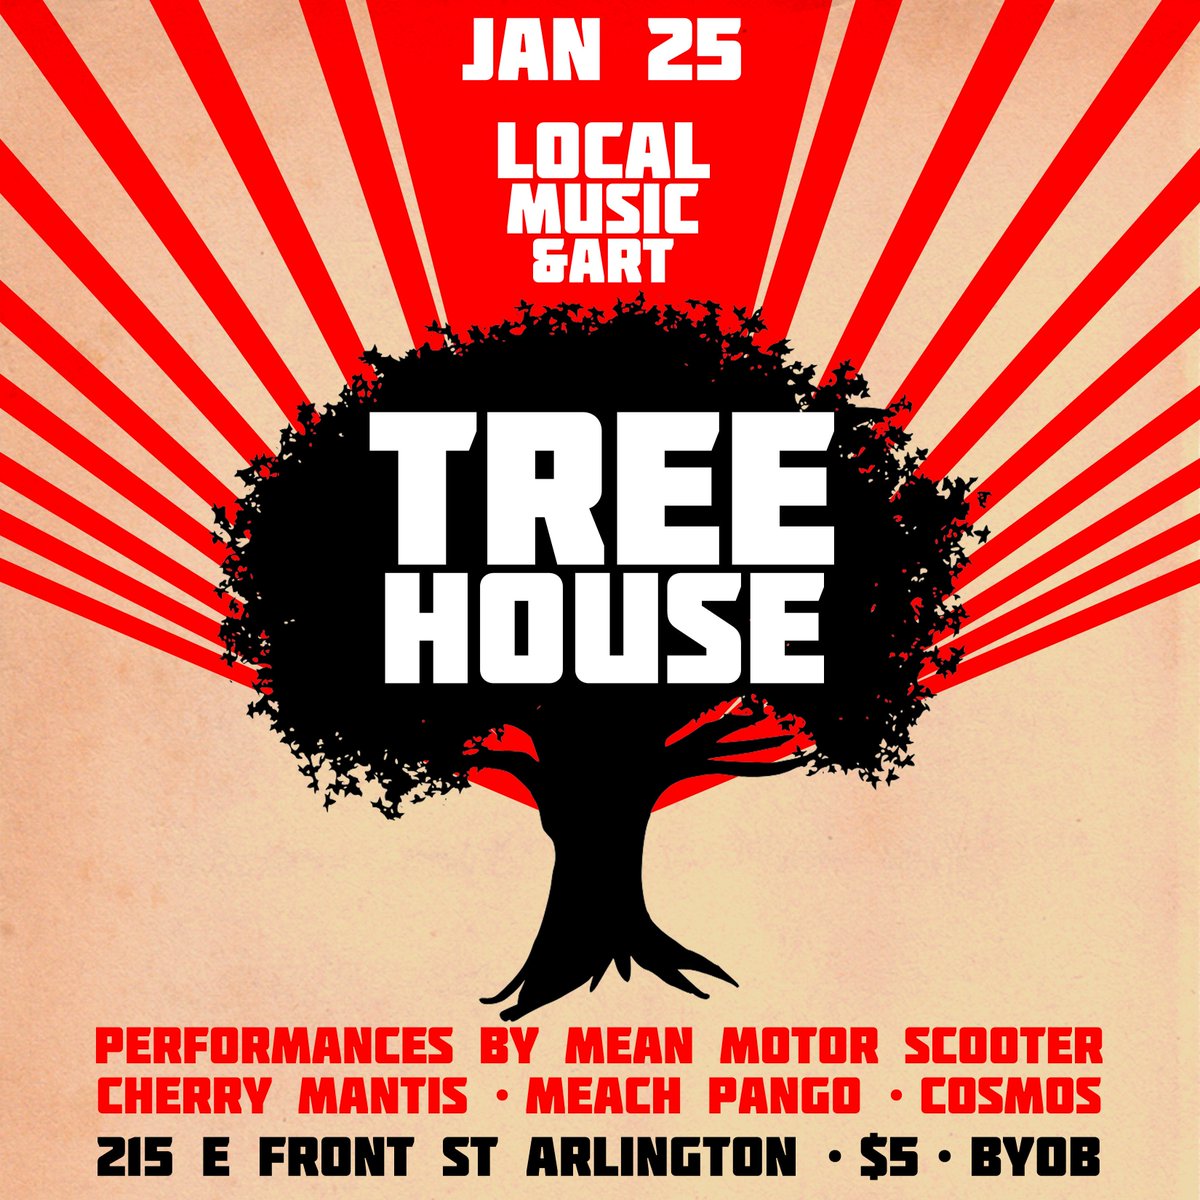 Come to the #Treehouse show on Friday, Jan 25th at 215 E Front St, #Arlington, TX 76011! More details soon! Live music & art vendors! $5 at the door! Full lineup + set times soon! 

#ArlingtonTX #livemusic #DFW #MeanMotorScooter #trashrock #garbagerock